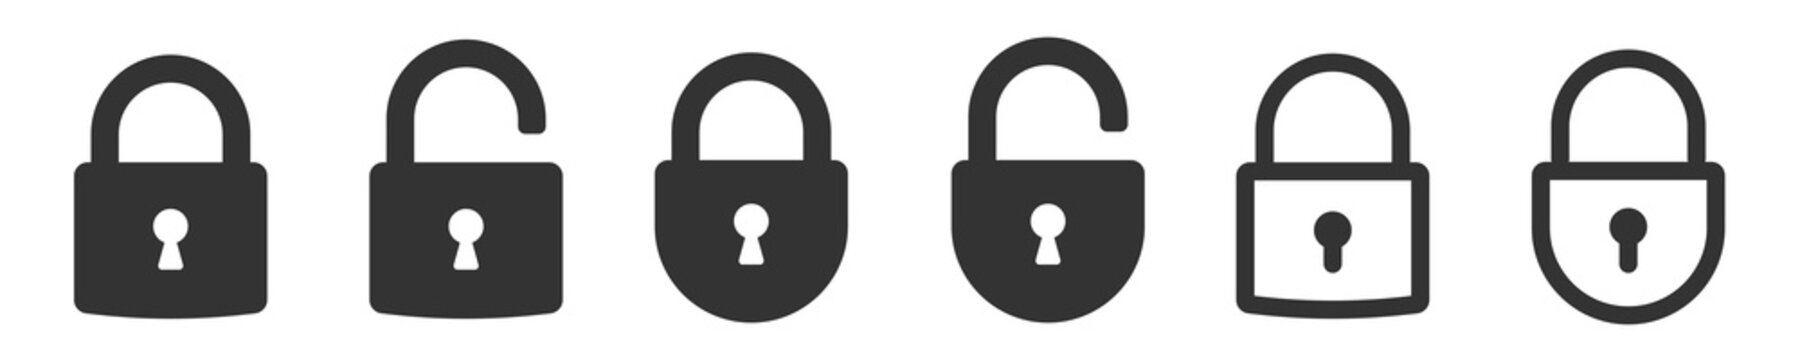 Lock icons set. Padlock symbol collection. Security symbol. Lock open and lock closed icon - stock vector.